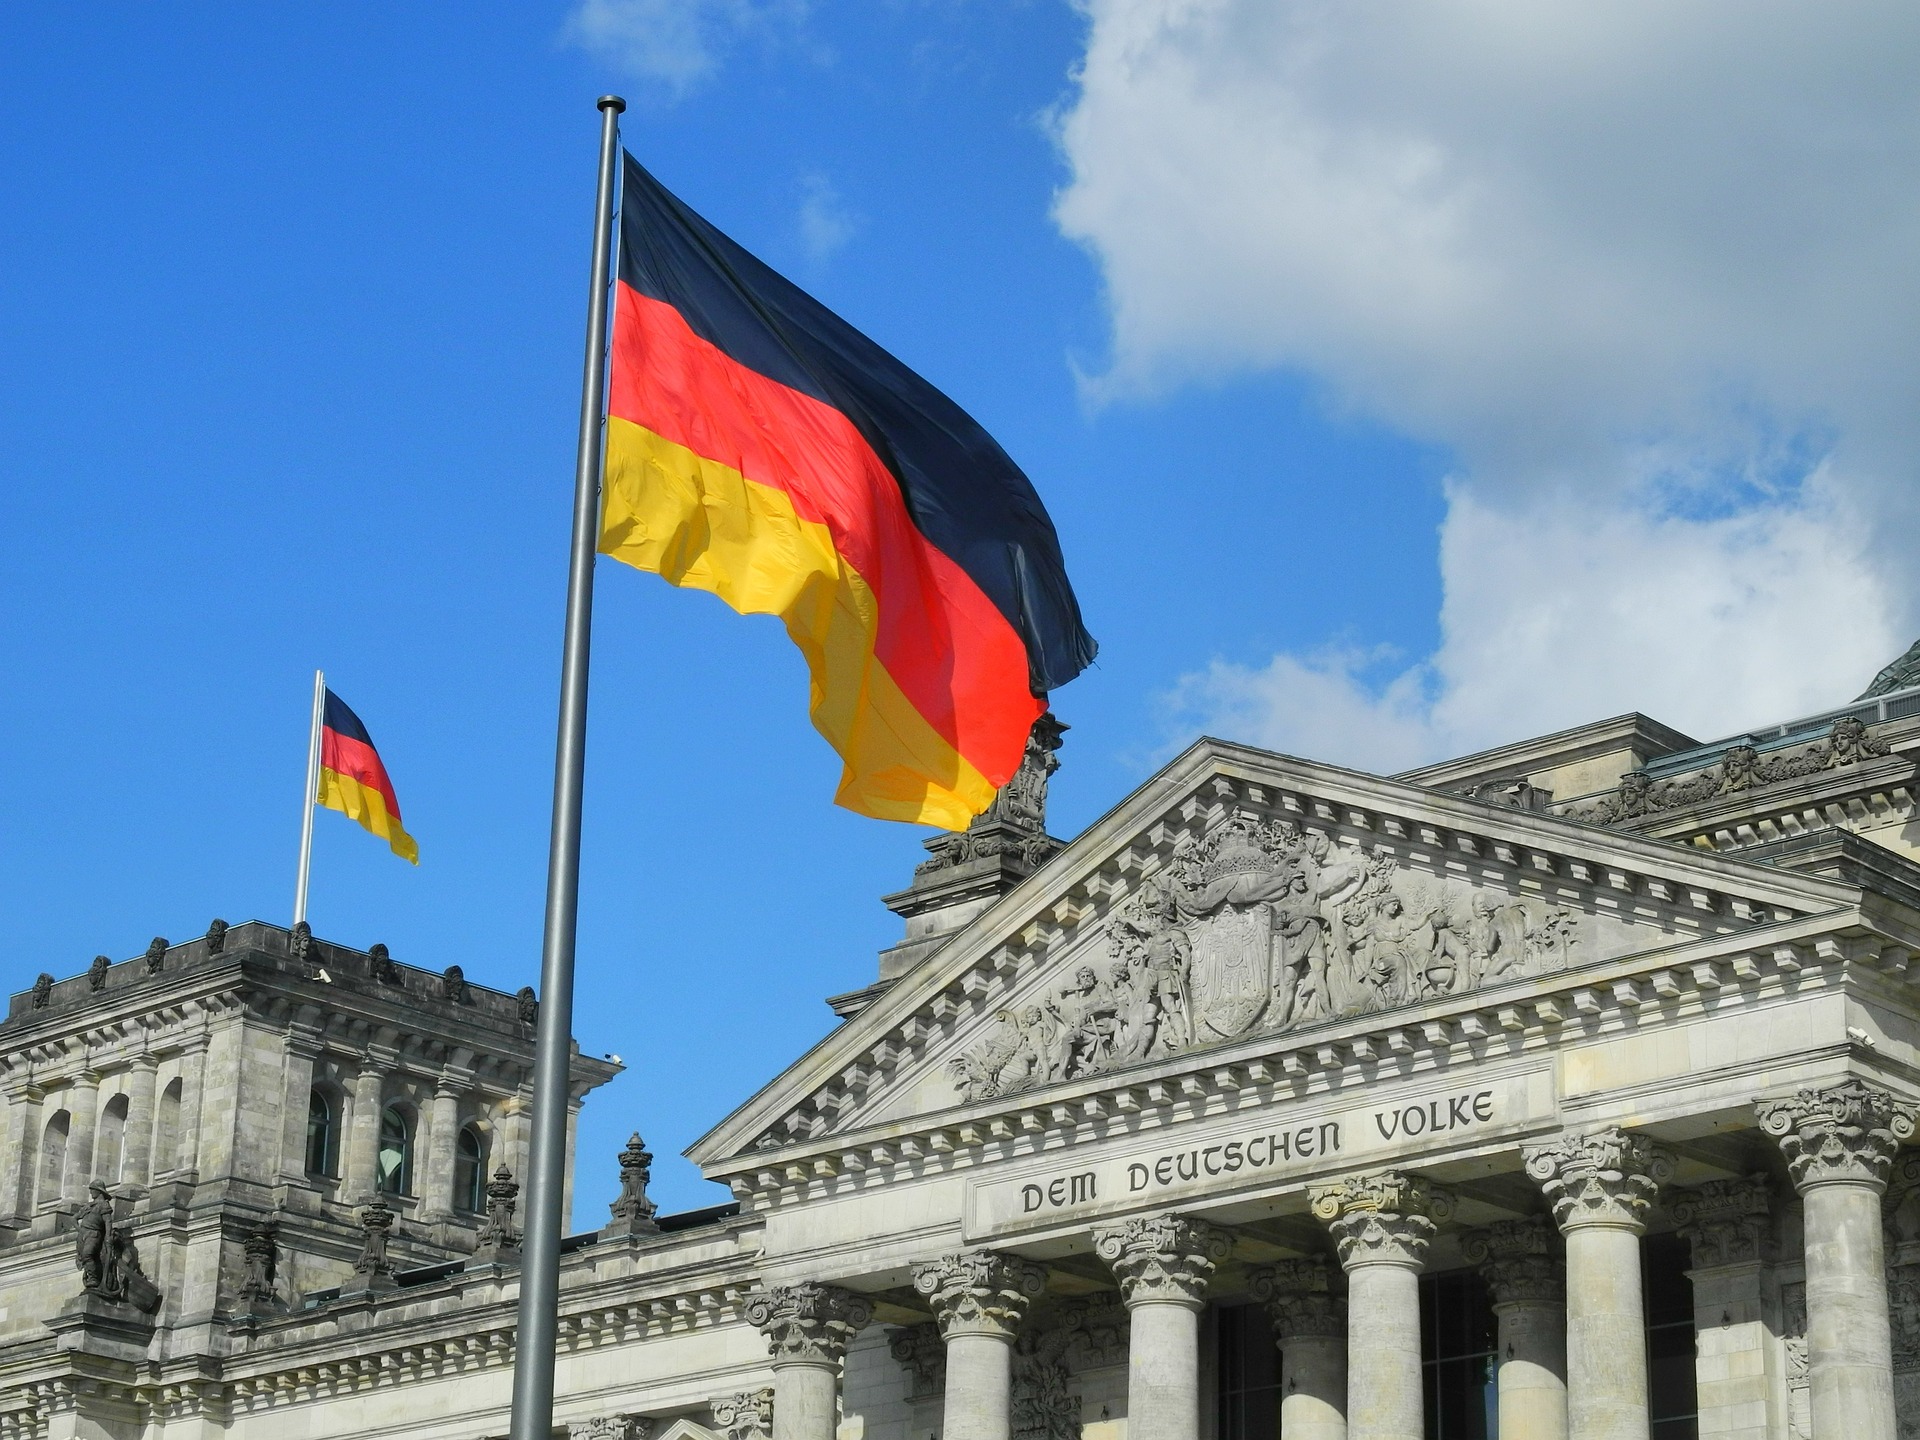 FUN FACTS ABOUT GERMANY THAT YOU PROBABLY DIDN’T KNOW